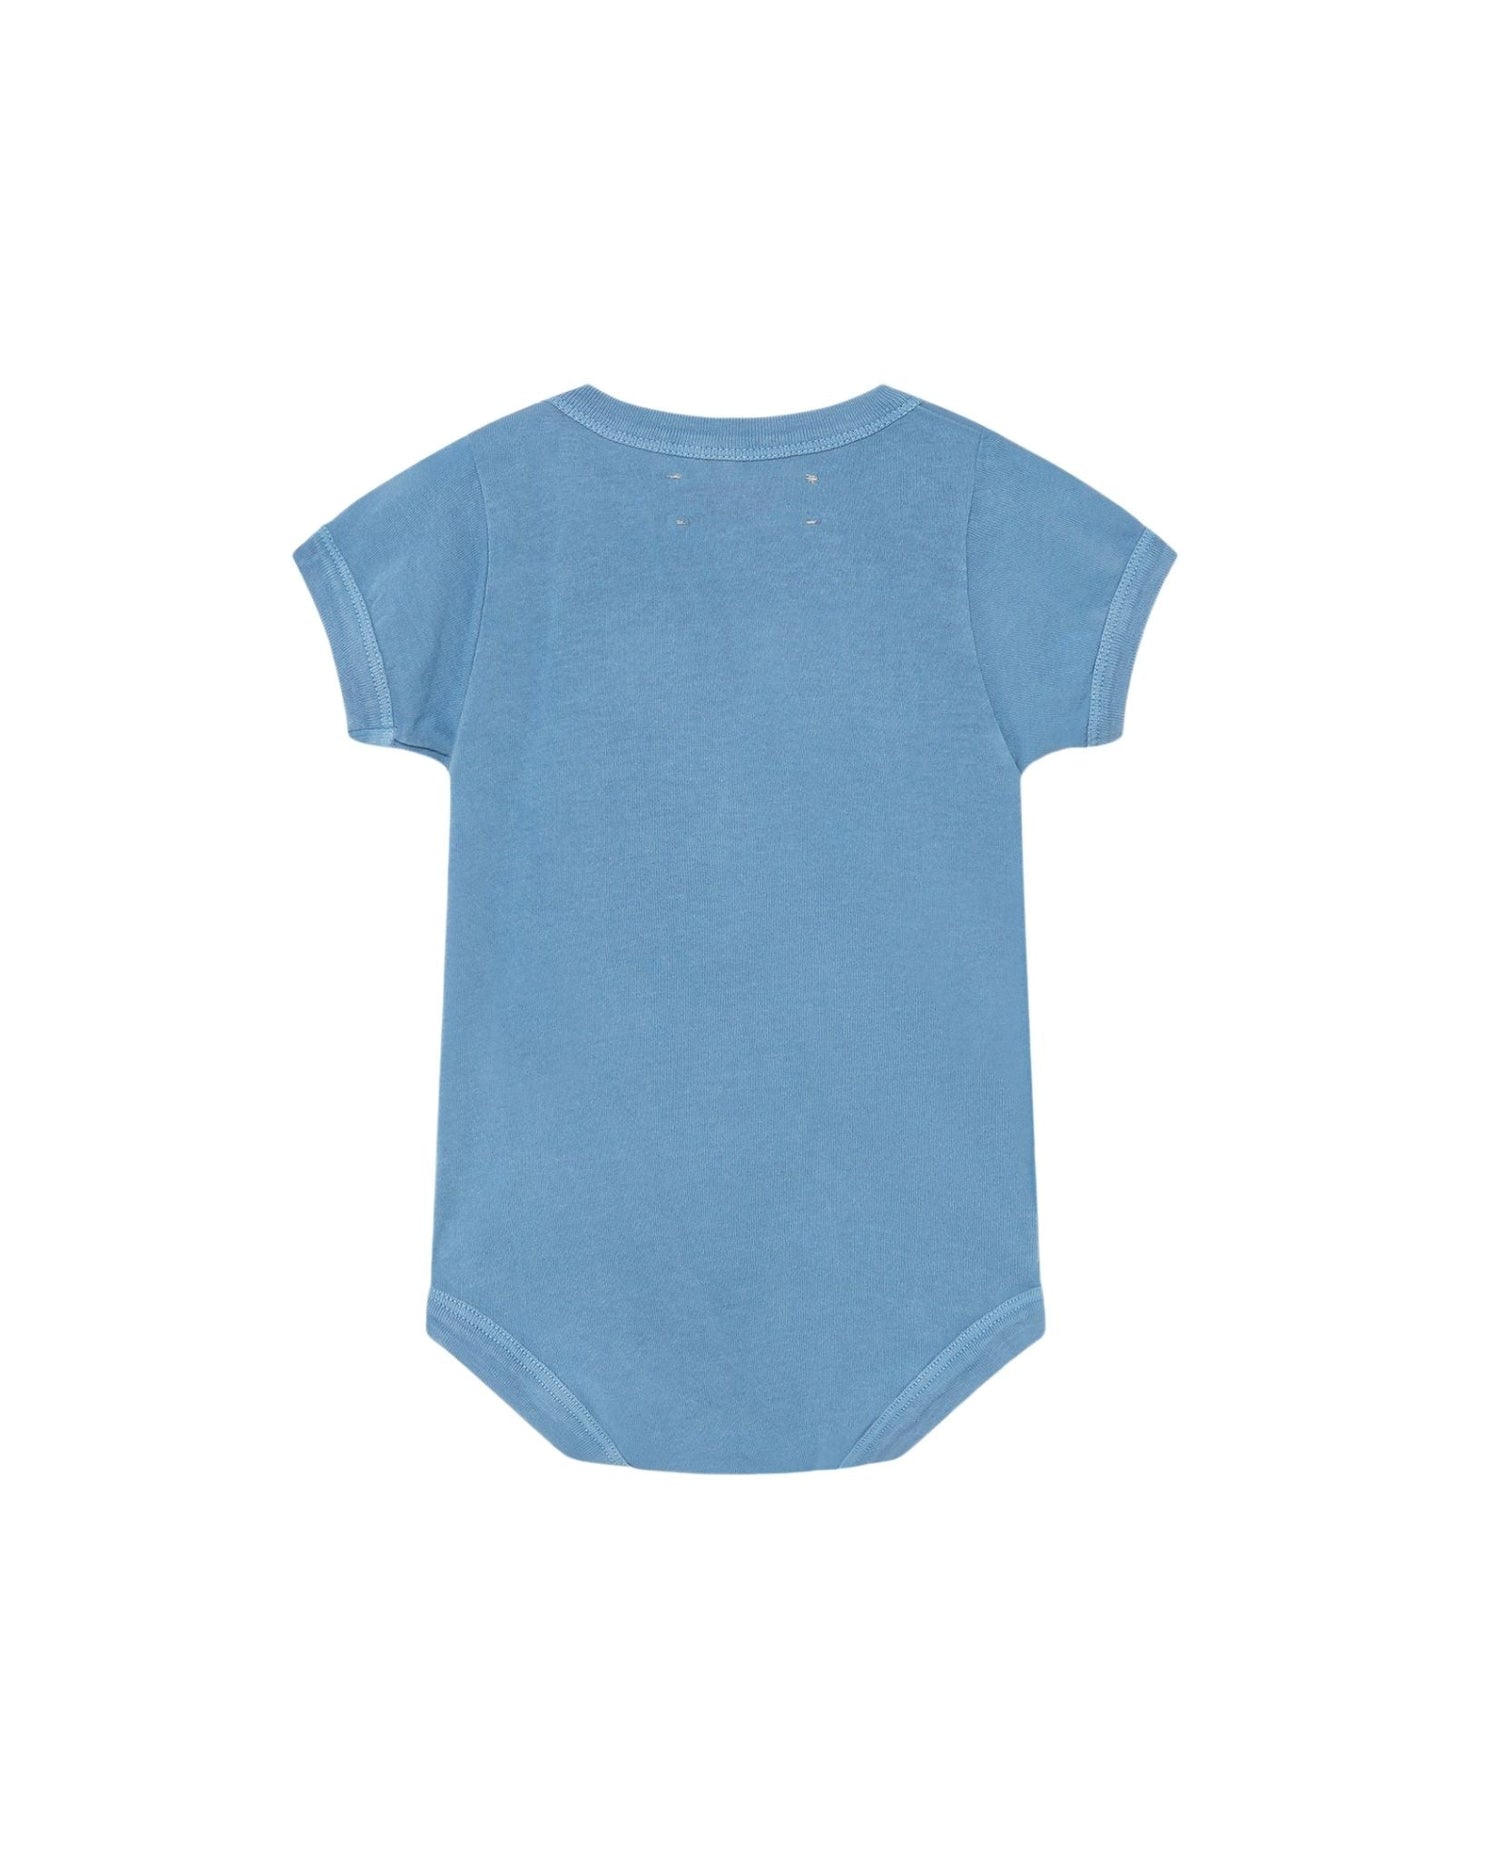 Chimpanzee baby body Blue Baby Grows The Animals Observatory 